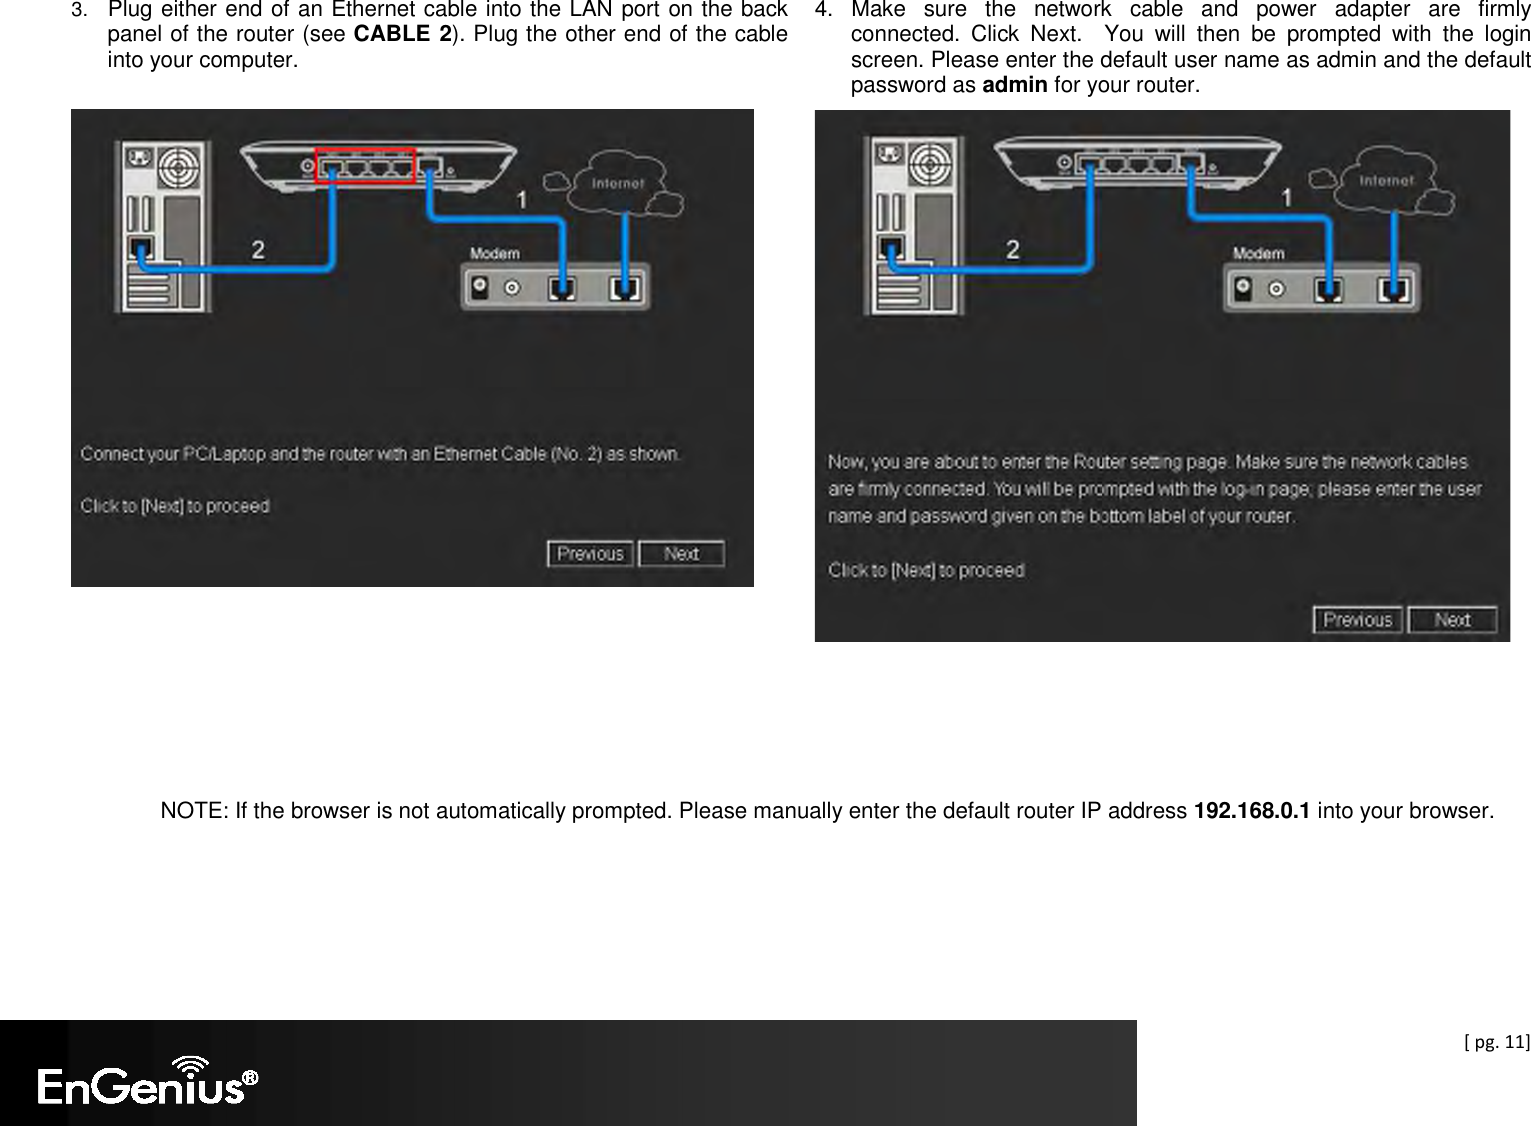  [ pg. 11] 3. Plug either end of an Ethernet cable into the LAN port on the back panel of the router (see CABLE 2). Plug the other end of the cable into your computer.        4.  Make  sure  the  network  cable  and  power  adapter  are  firmly connected.  Click  Next.    You  will  then  be  prompted  with  the  login screen. Please enter the default user name as admin and the default password as admin for your router.      NOTE: If the browser is not automatically prompted. Please manually enter the default router IP address 192.168.0.1 into your browser.    